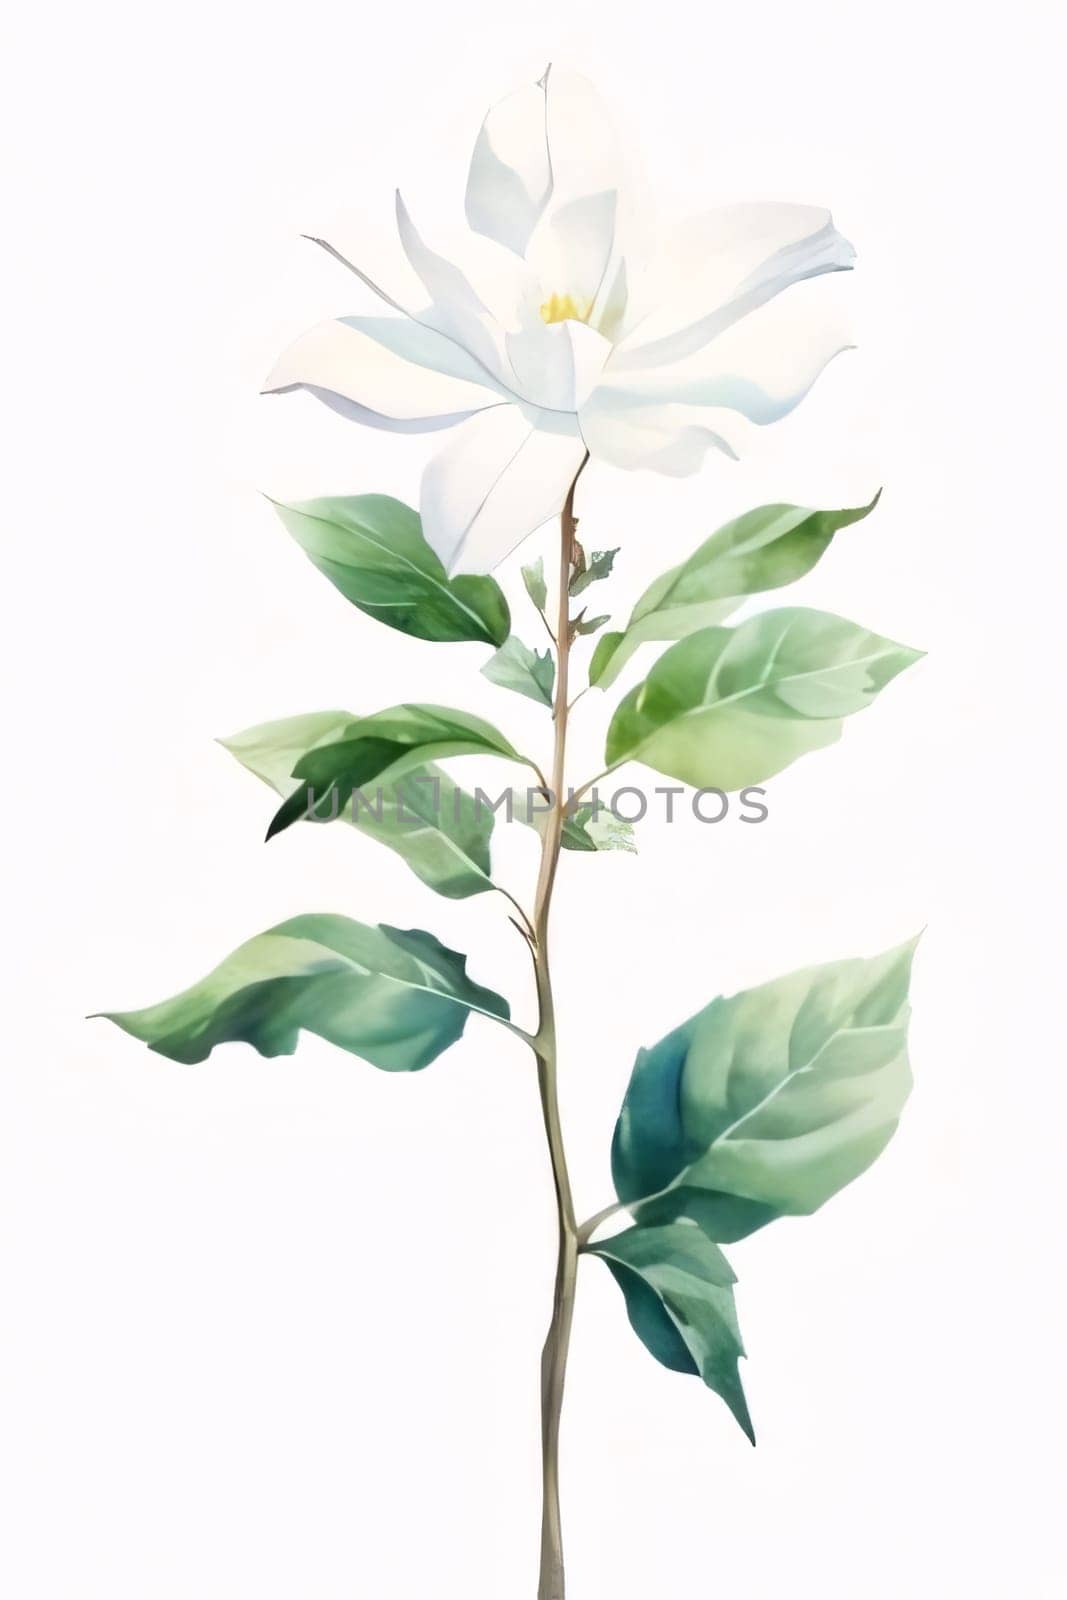 Drawn, painted lily of the valley on isolated white background. Flowering flowers, a symbol of spring, new life. A joyful time of nature waking up to life.